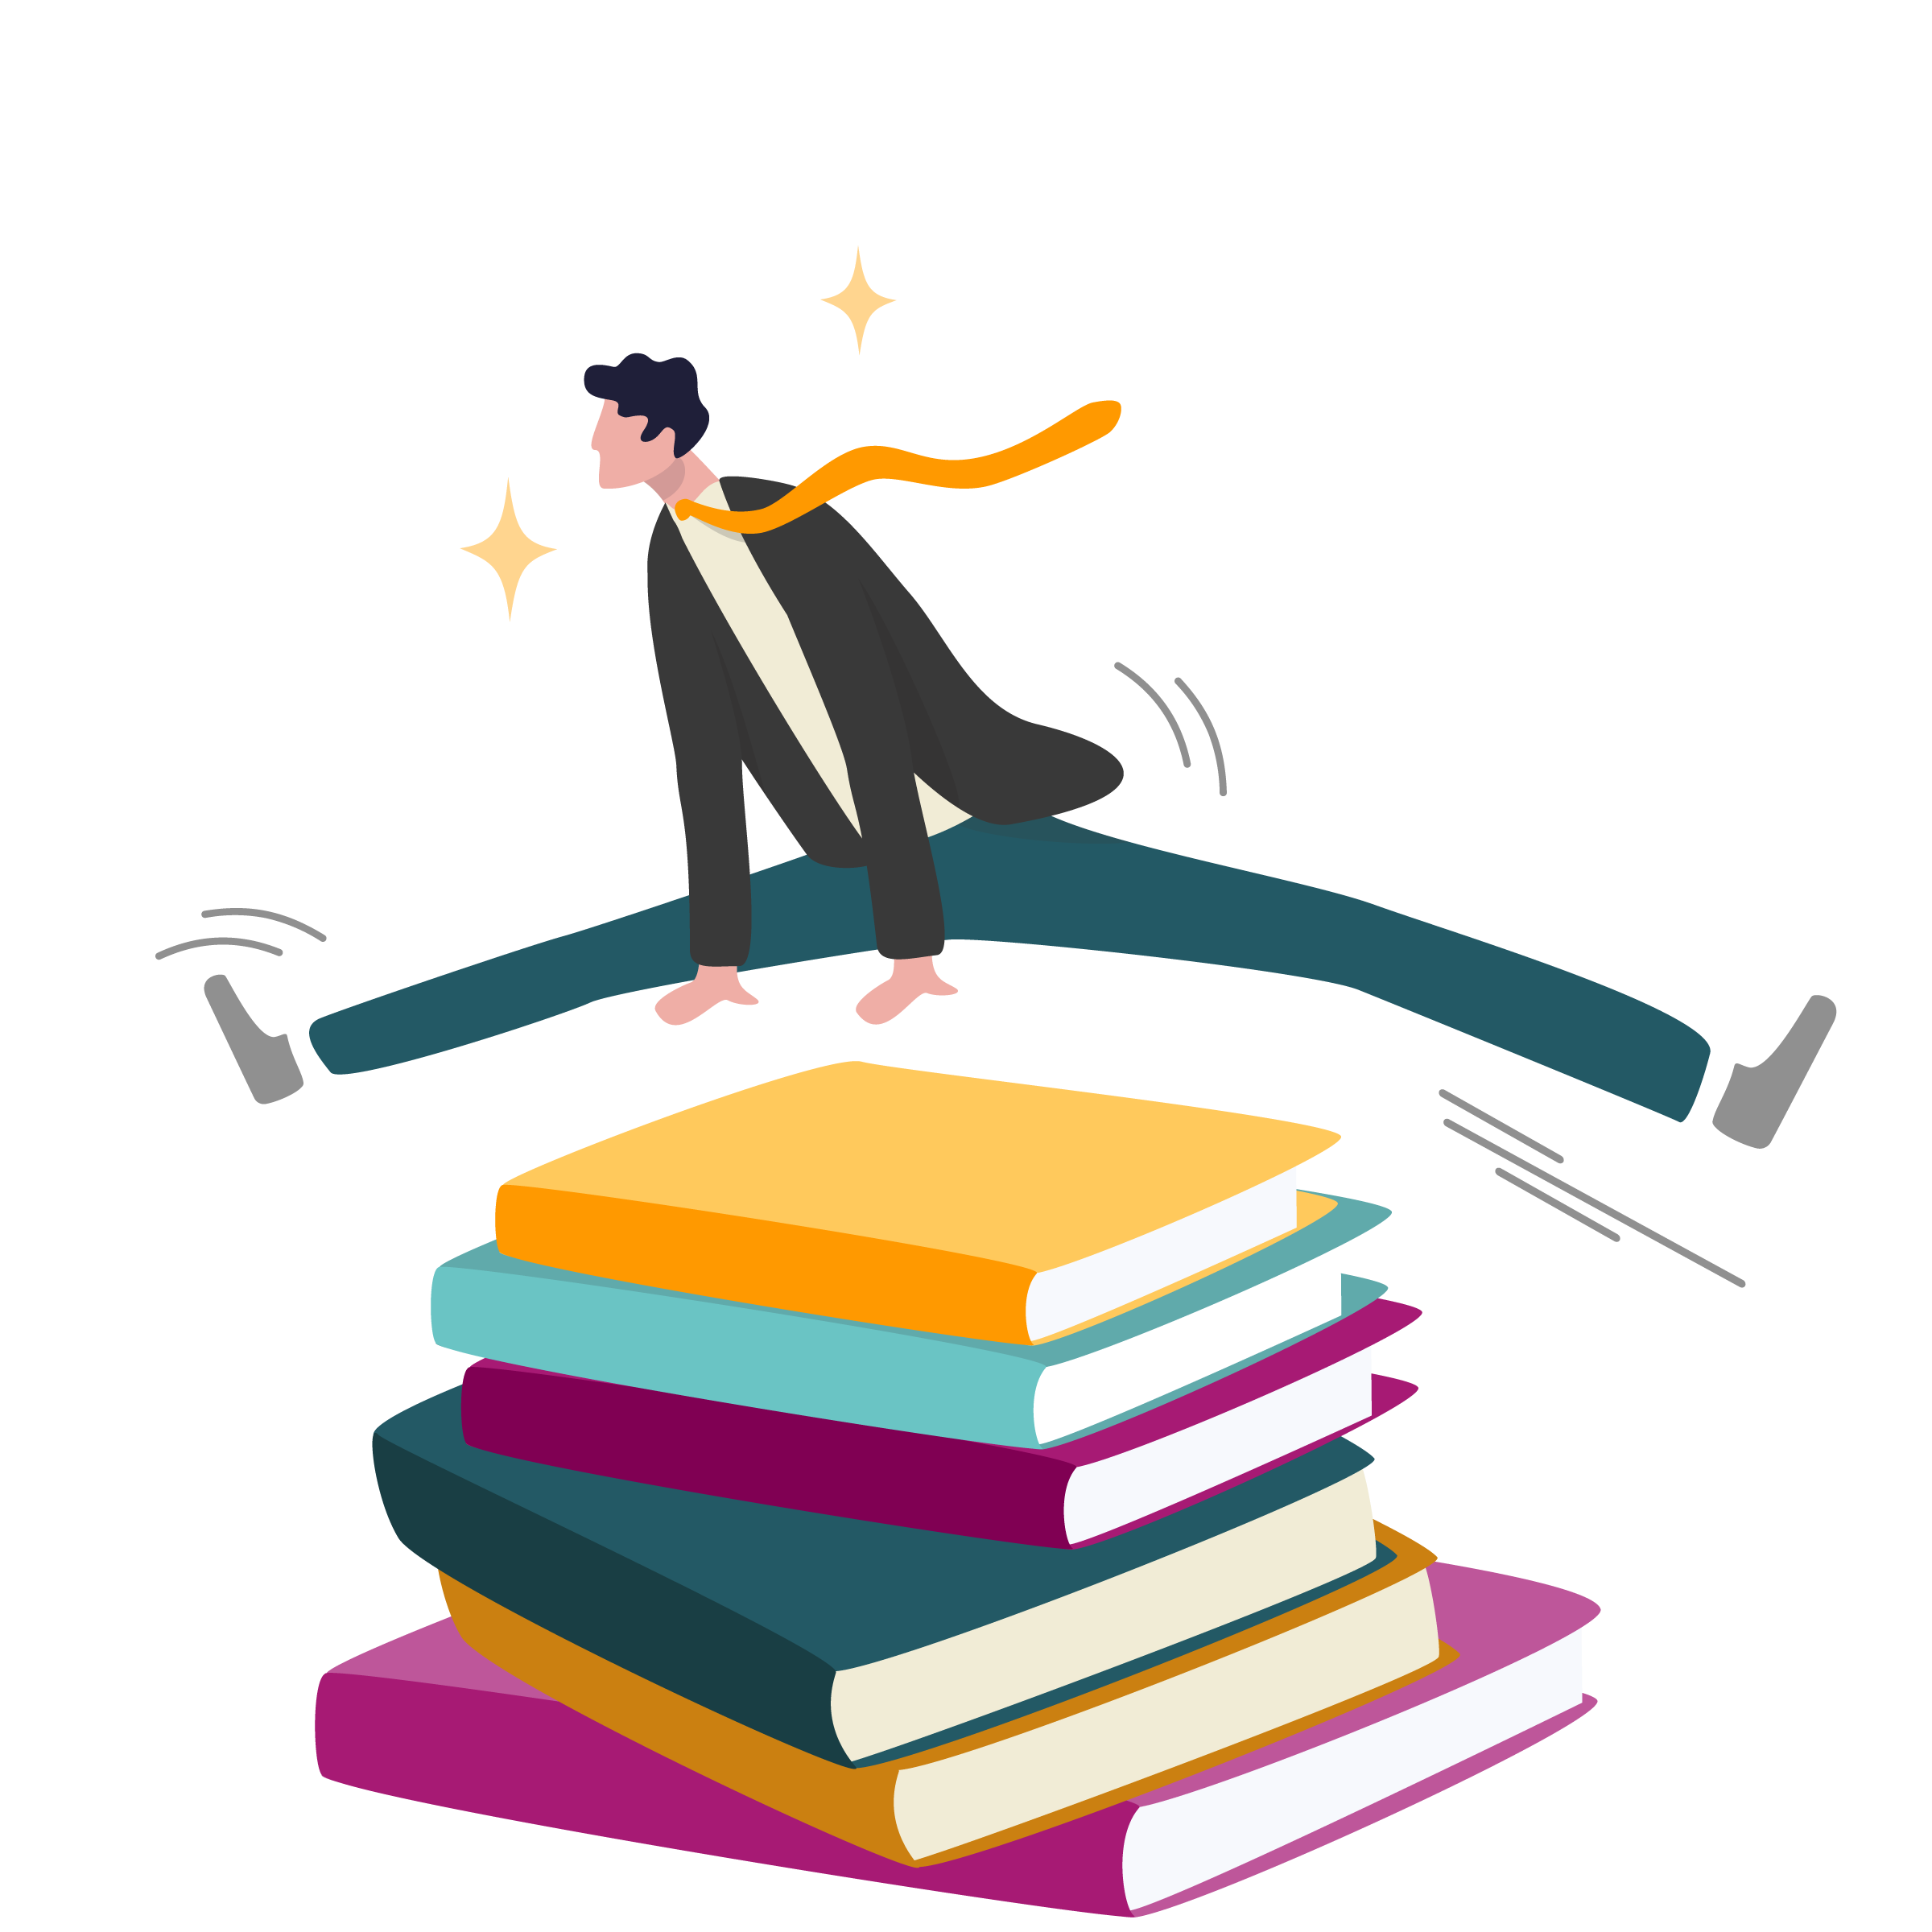 graphic of a man jumping over a stack of books